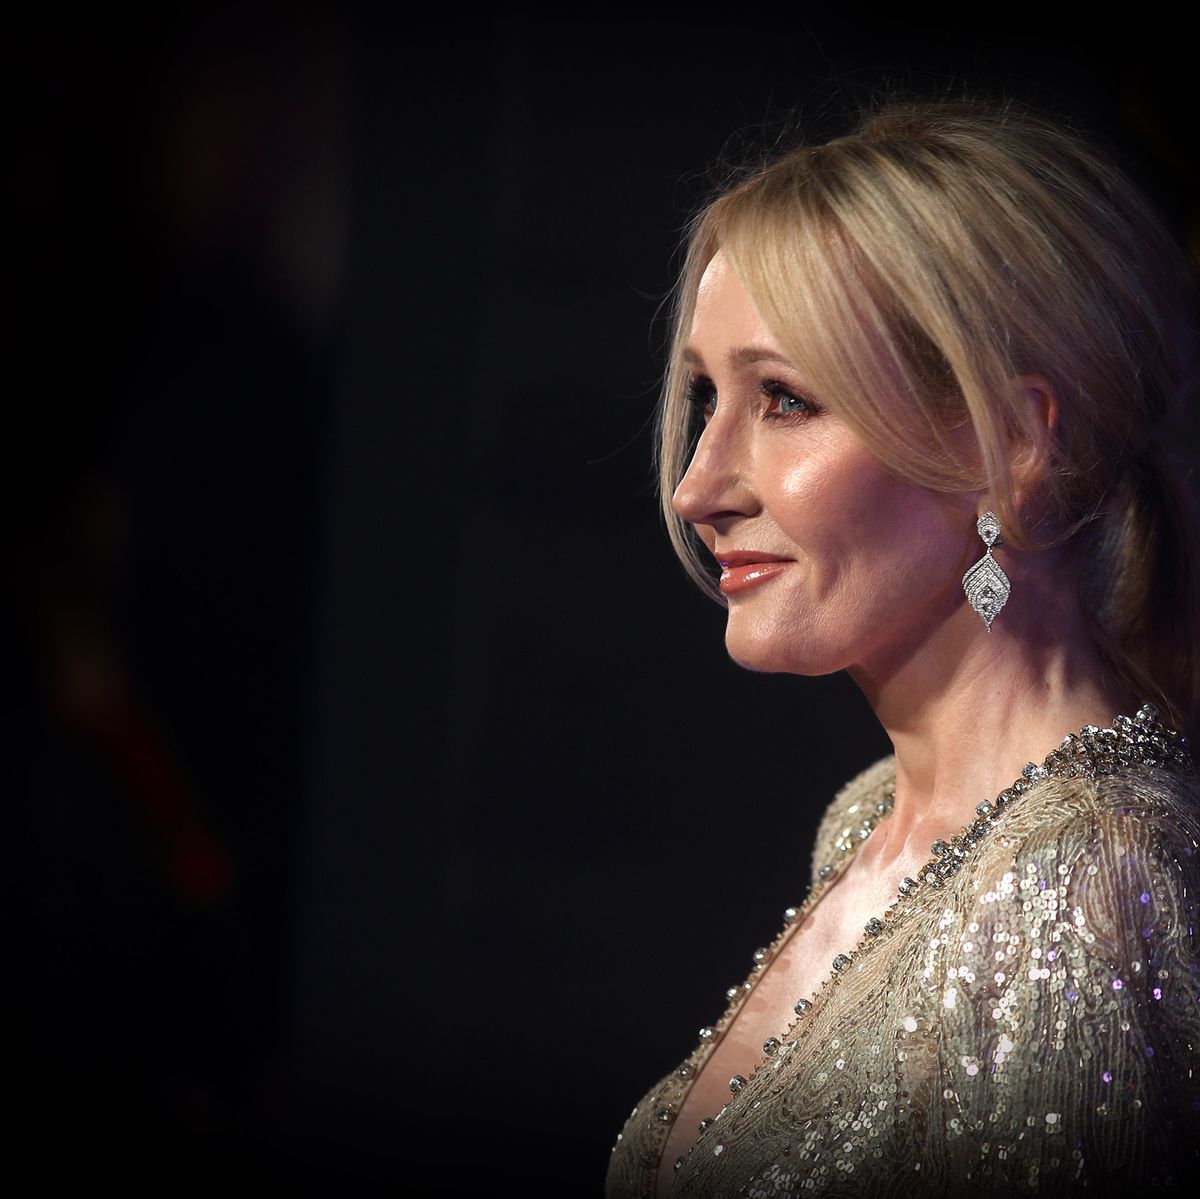 Who Is JK Rowling? (Who Was?) See more